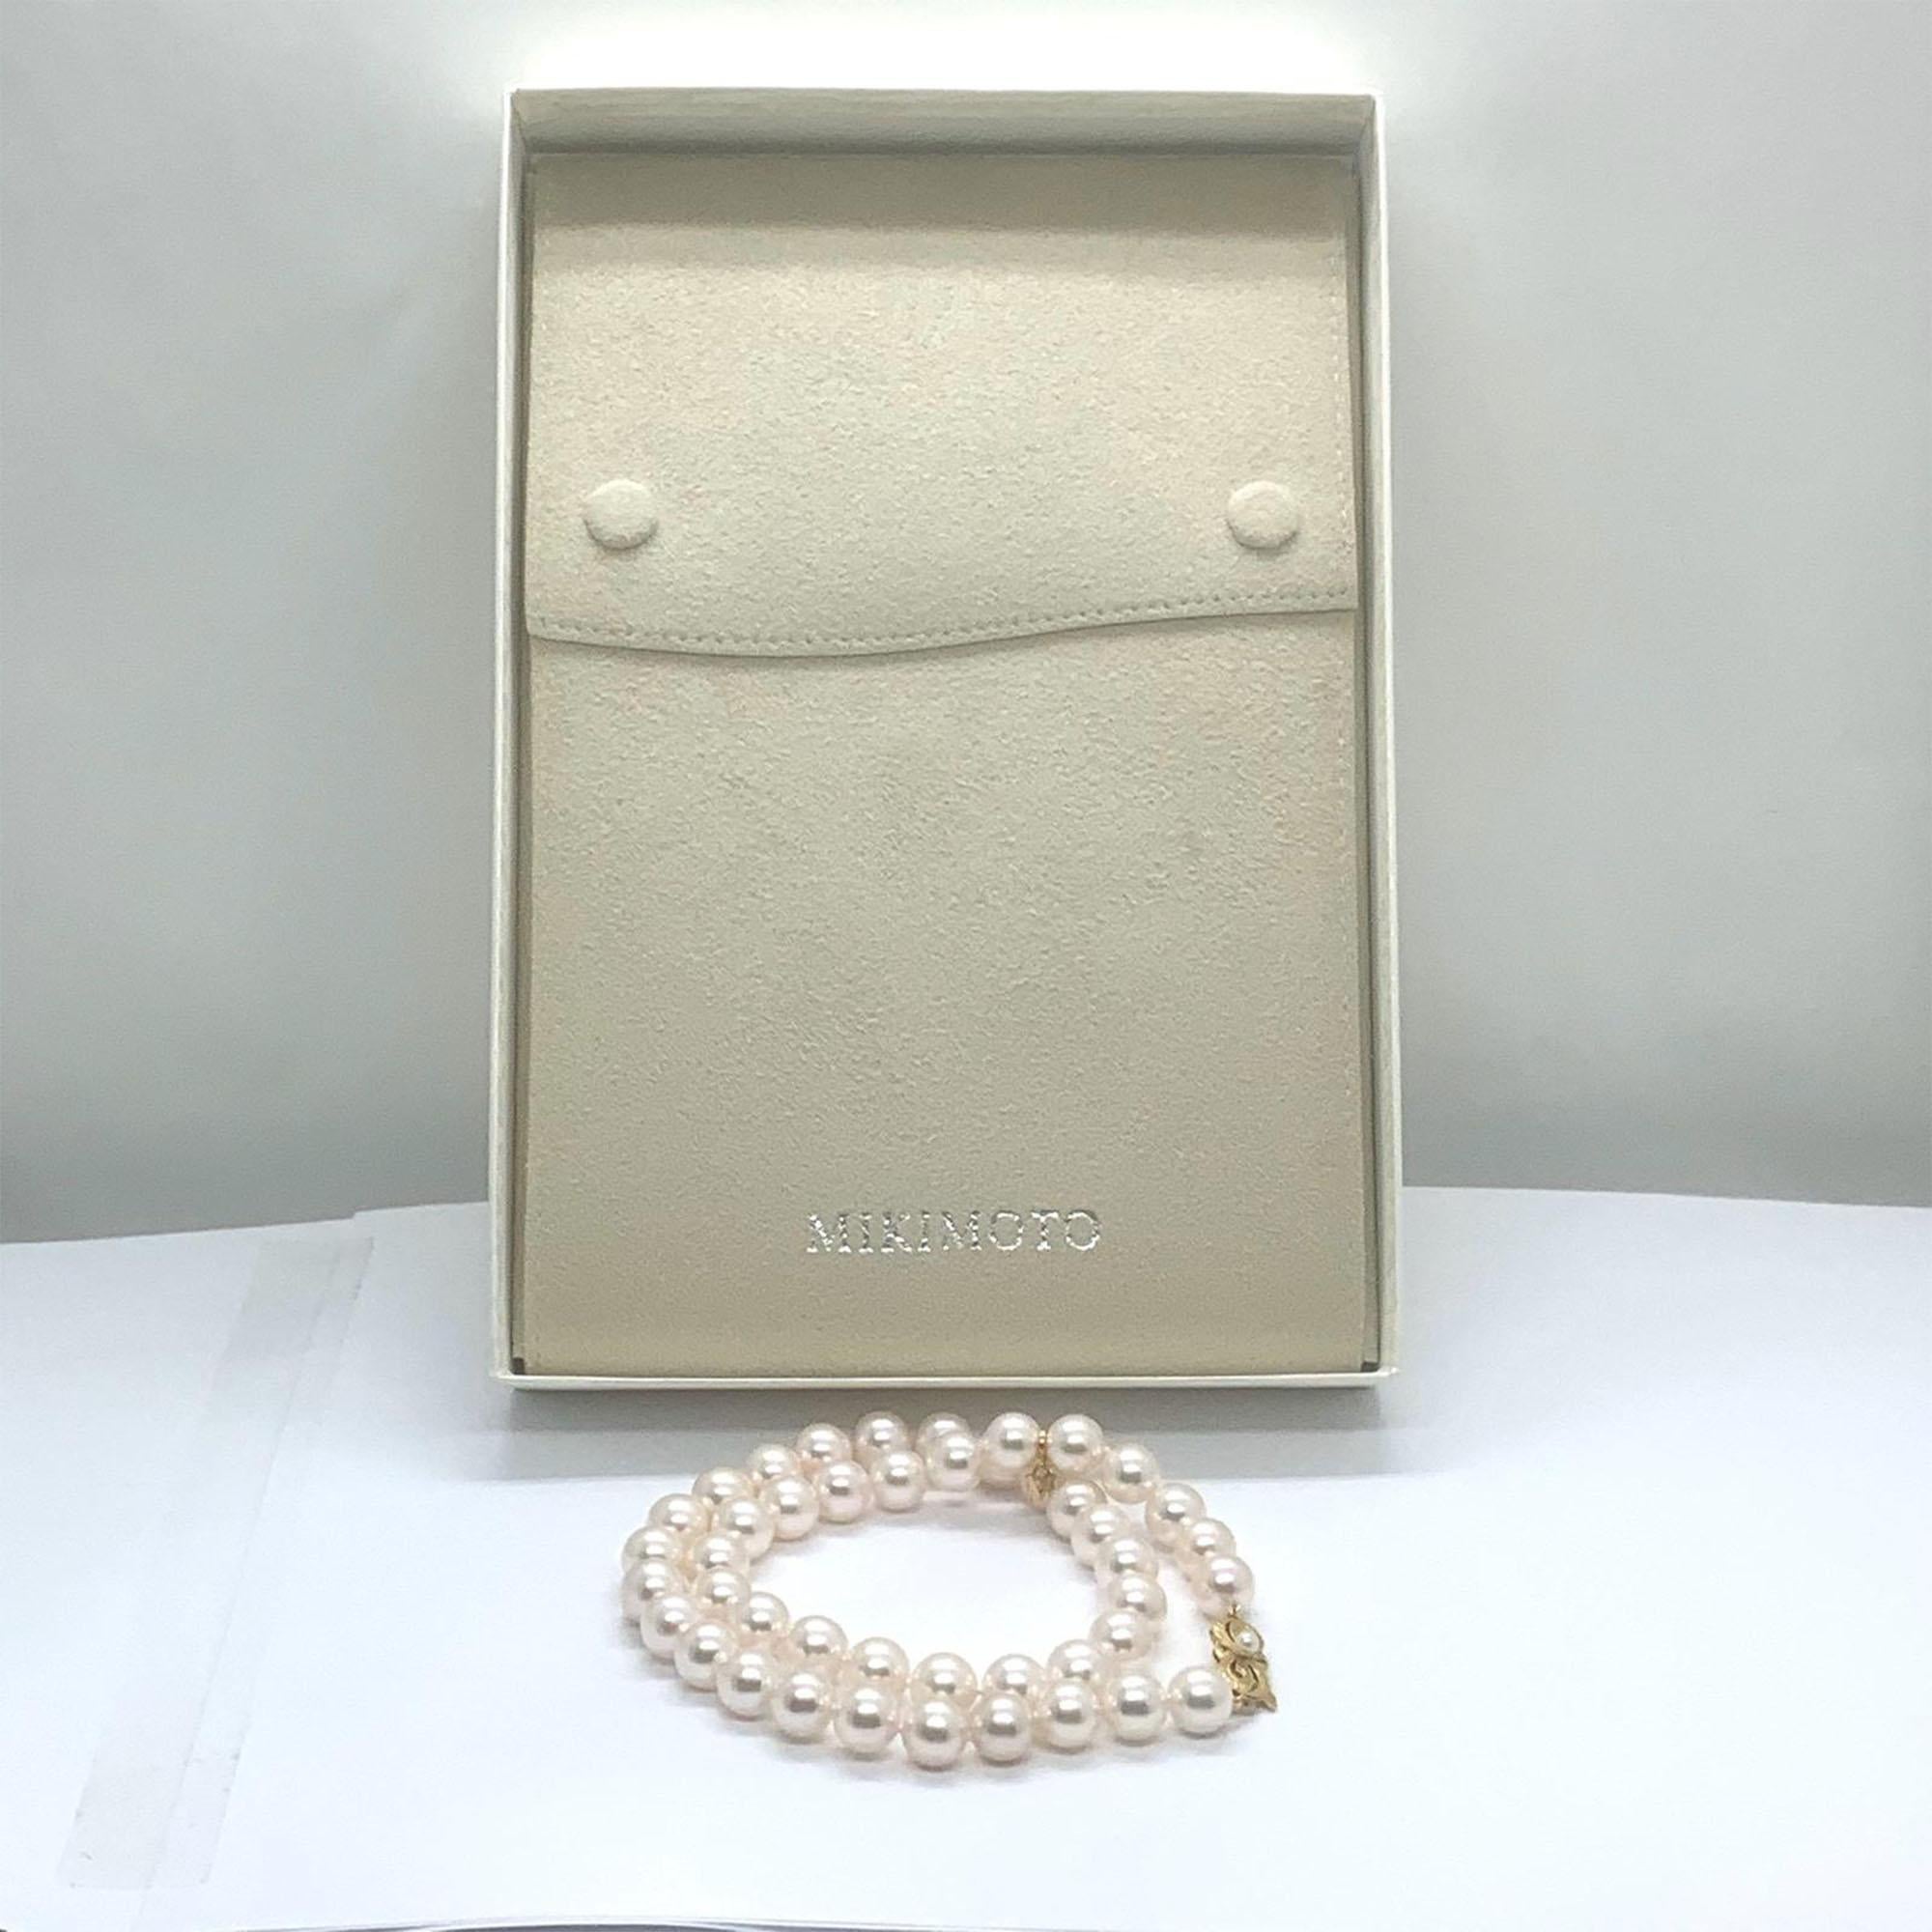 Certified by Mikimoto in New York for the amount of $23,640
Estate Mikimoto 44 LARGE 9.5-9 mm 17 Inch 18 KT Yellow Gold Clasp in Like New Condition

TRUSTED SELLER SINCE 2002
PLEASE SEE OUR HUNDREDS OF POSITIVE FEED BACKS FROM OUR CLIENTS.
PLEASE